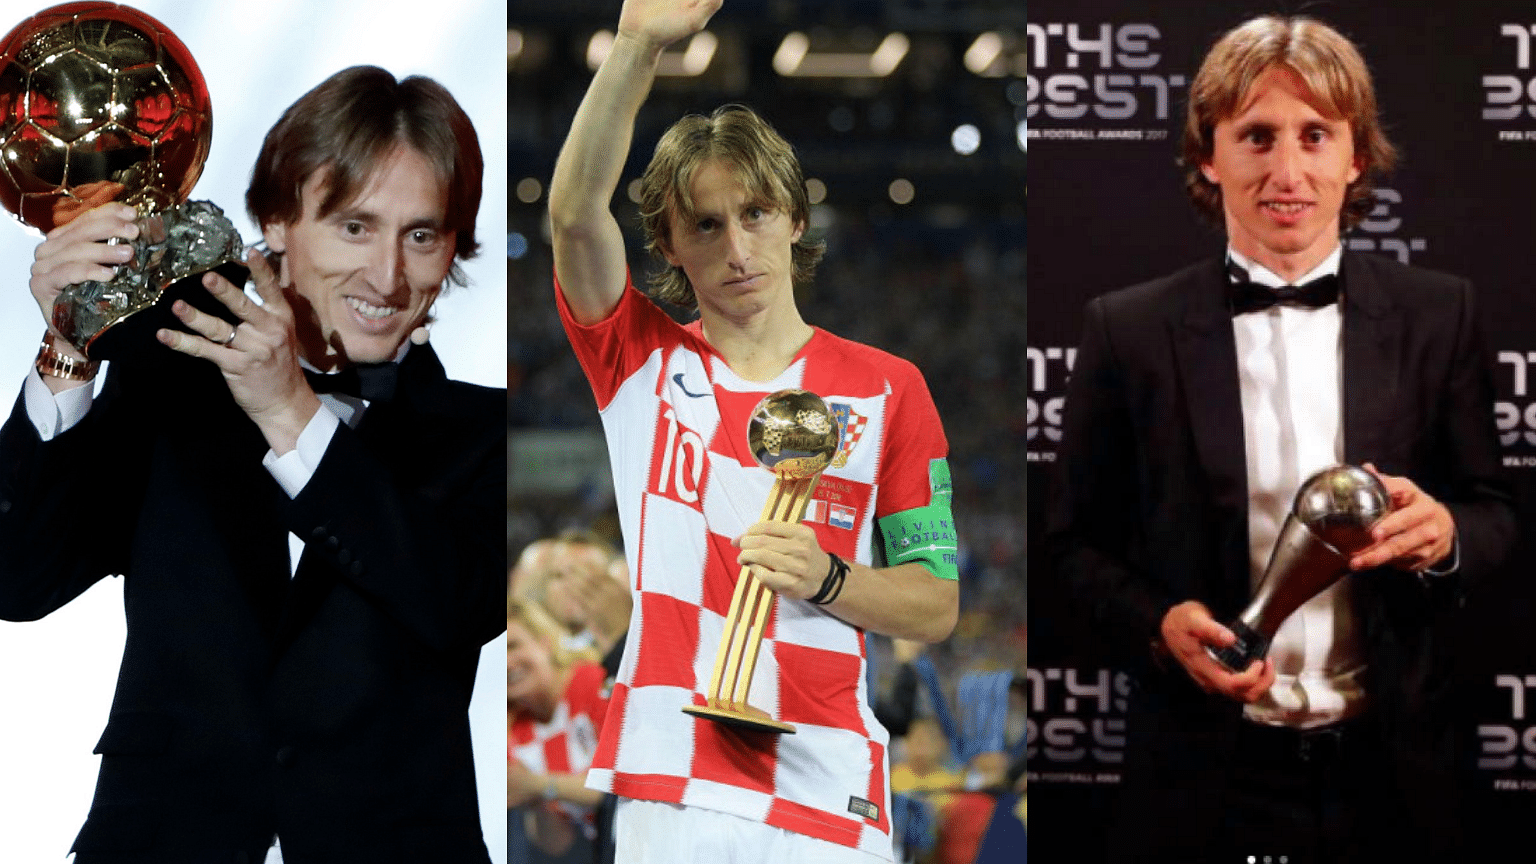 Luka Modric won the Ballon d’Or, The Golden Ball at the World Cup and The FIFA Player of the Year in 2018